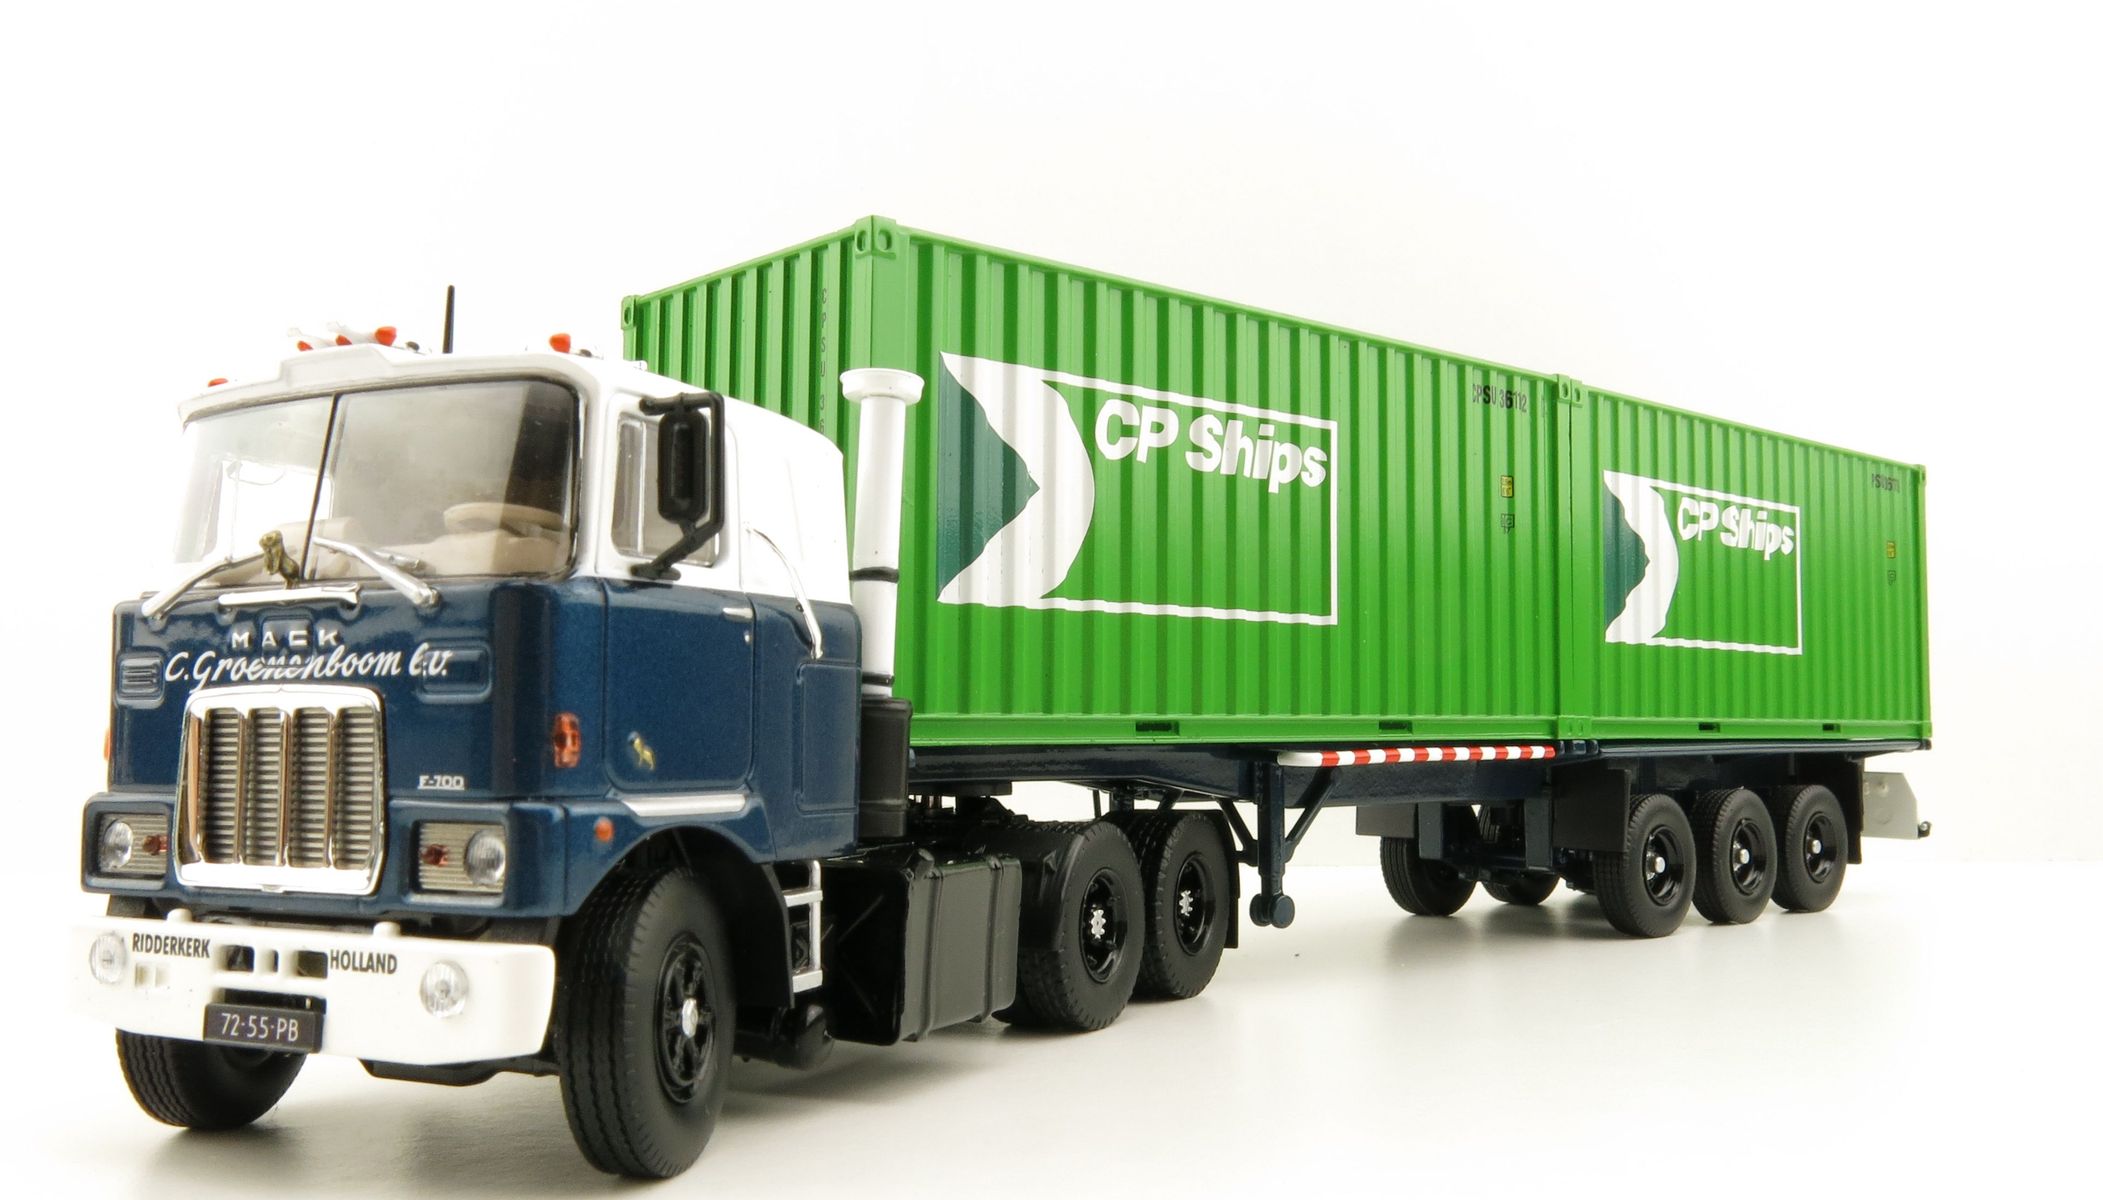 Product Image - Tekno 81194 Mack F700 6x4 Truck Groenenboom with Container Trailer 2x 20ft Container CP Ships - Scale 1:50